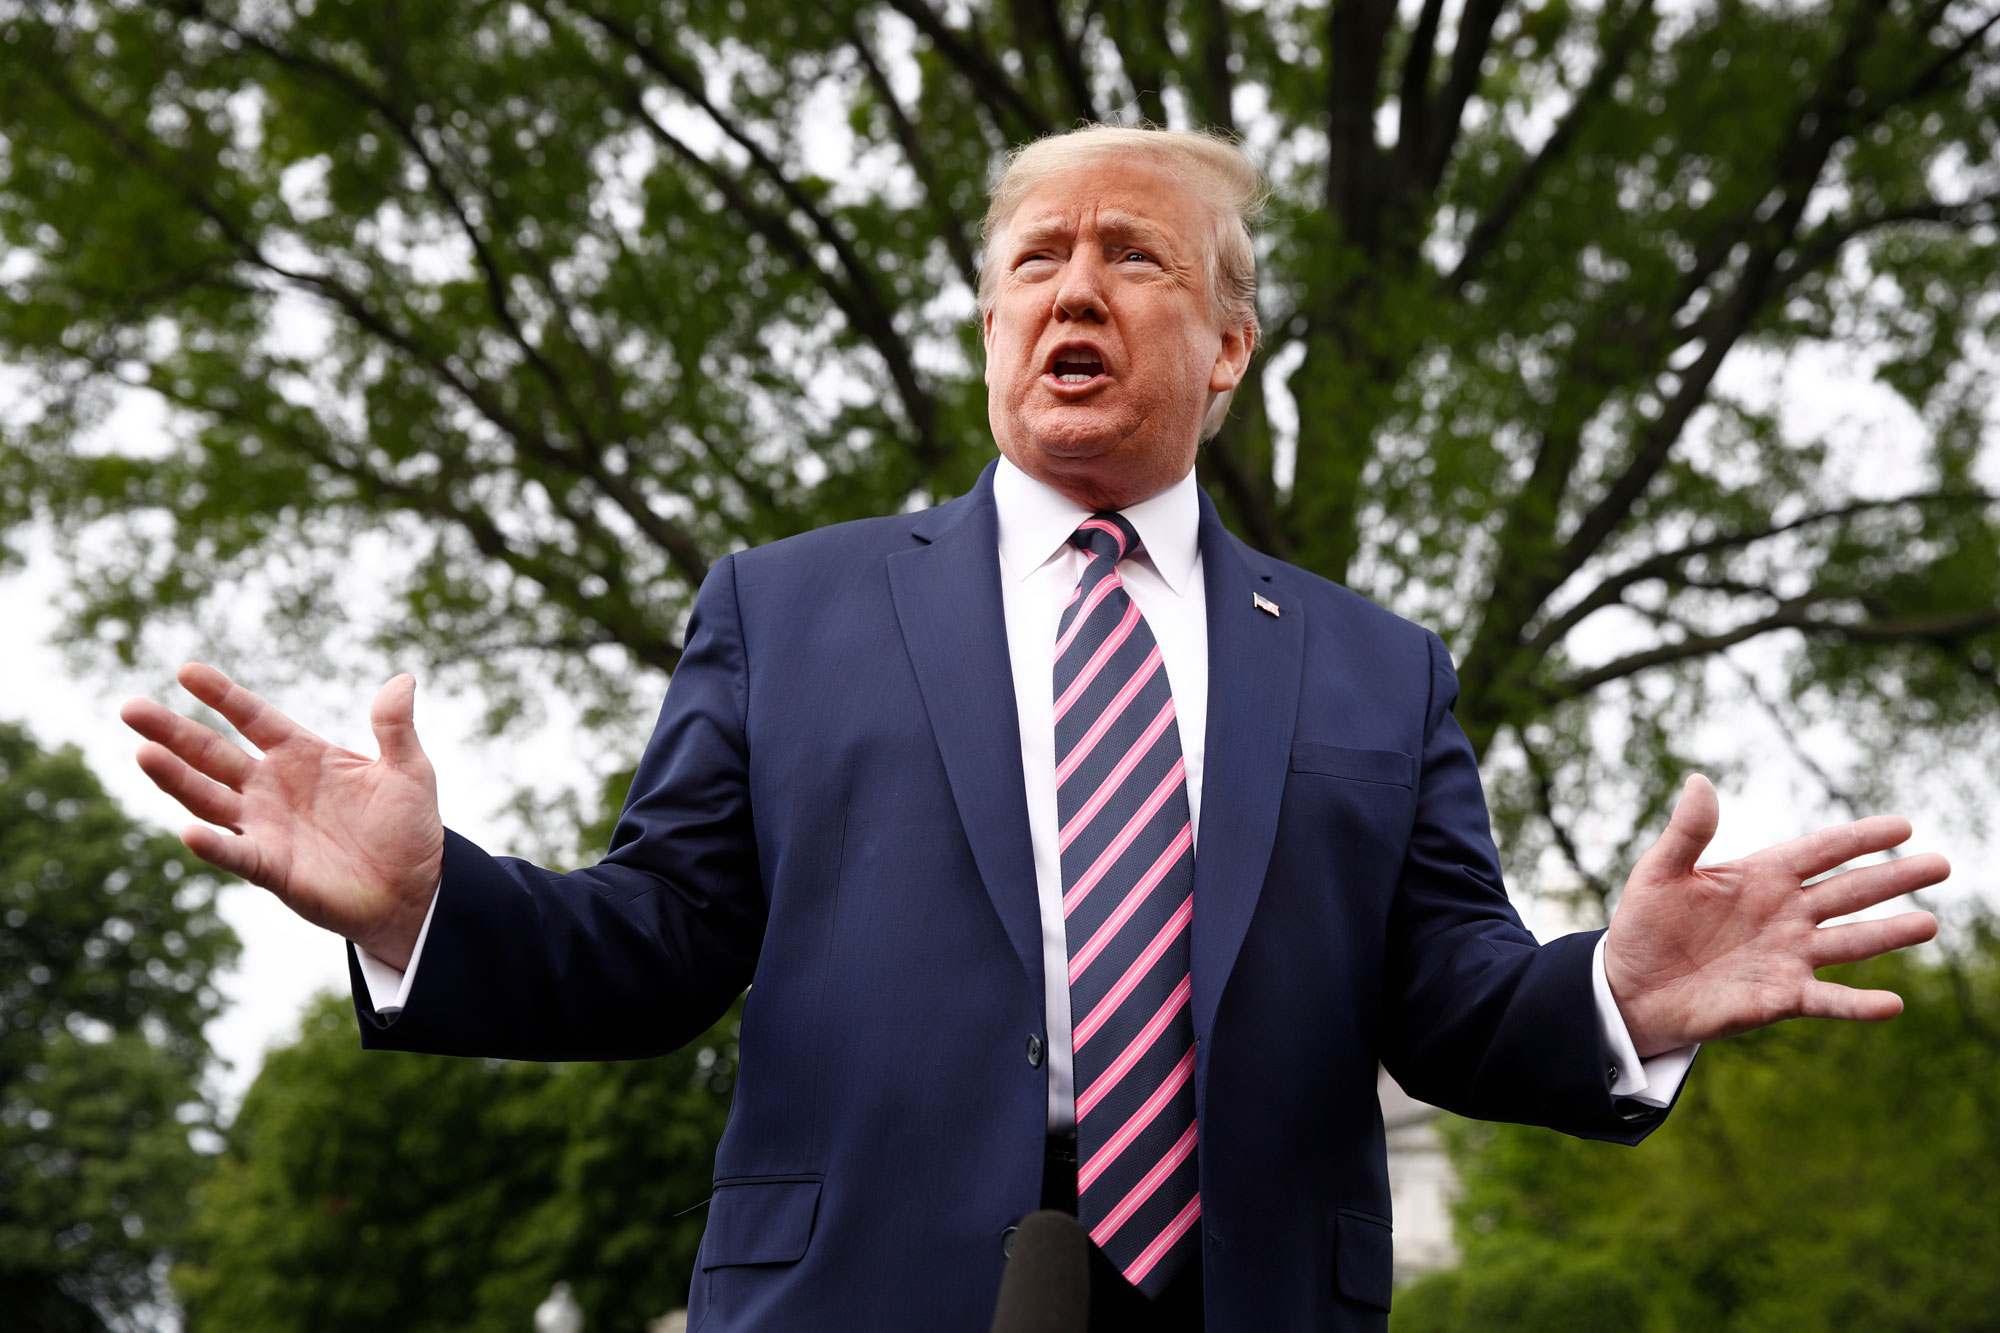 President Donald Trump speaks to members of the media on the South Lawn of the White House in Washington, on May 5.